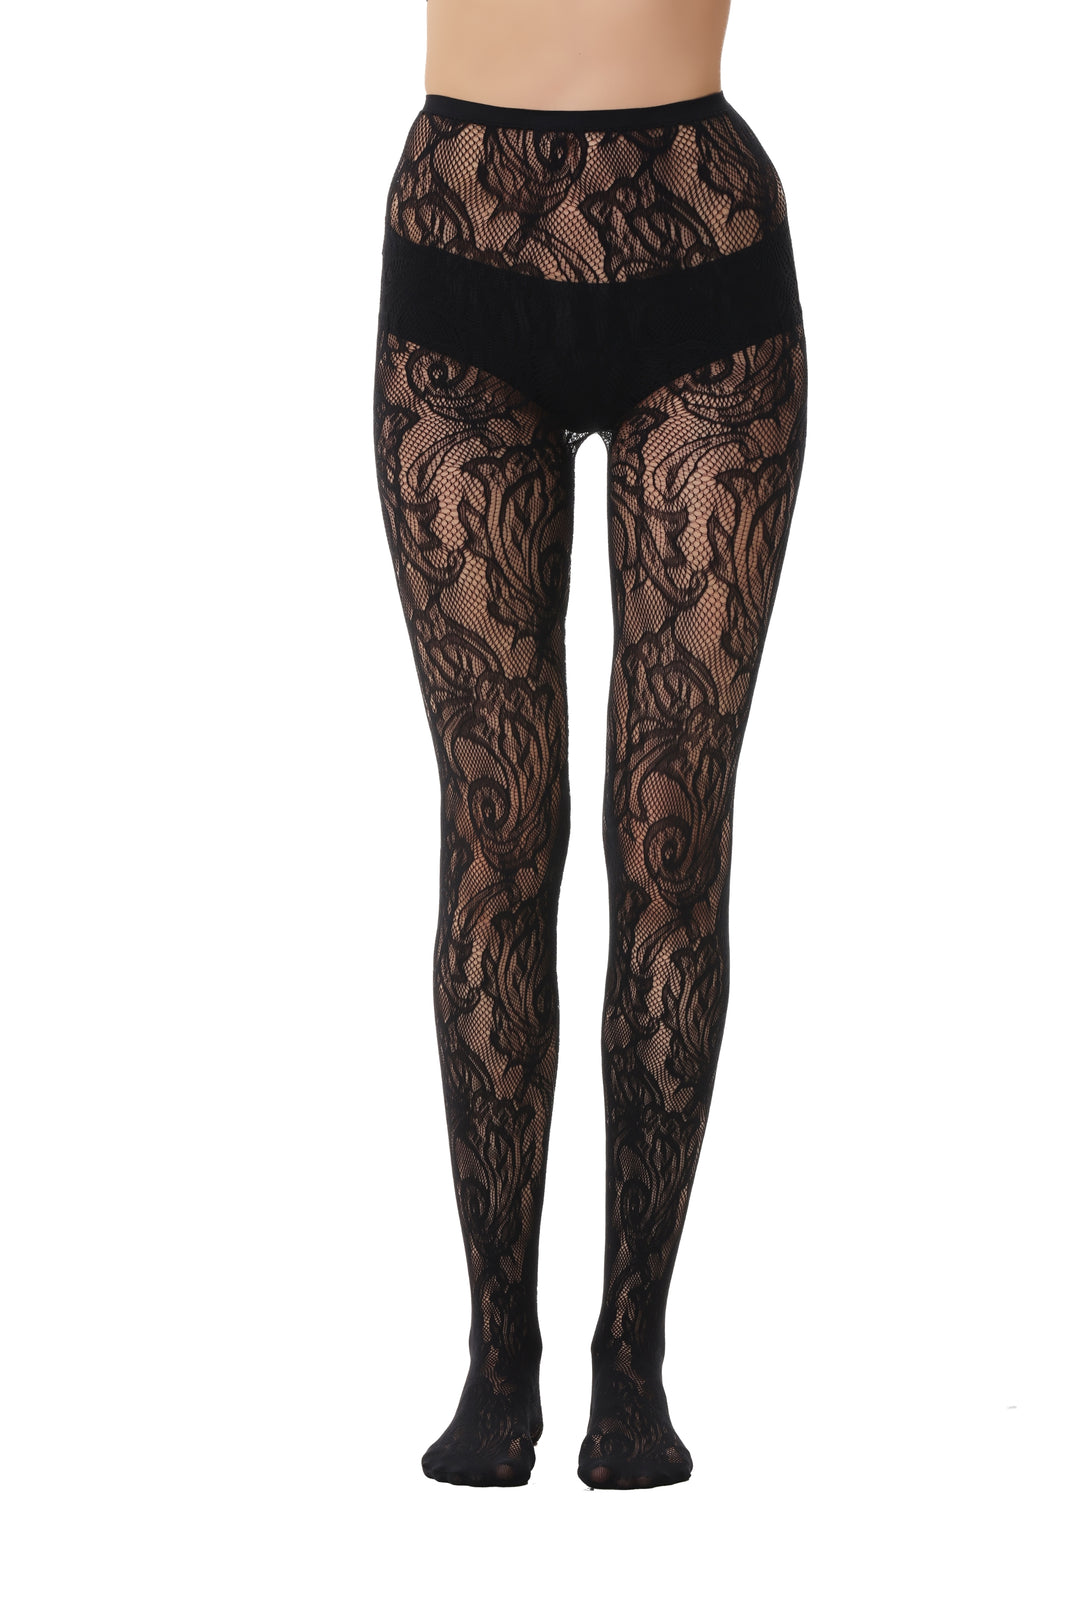 Fishnet Tights 110996-2 Front